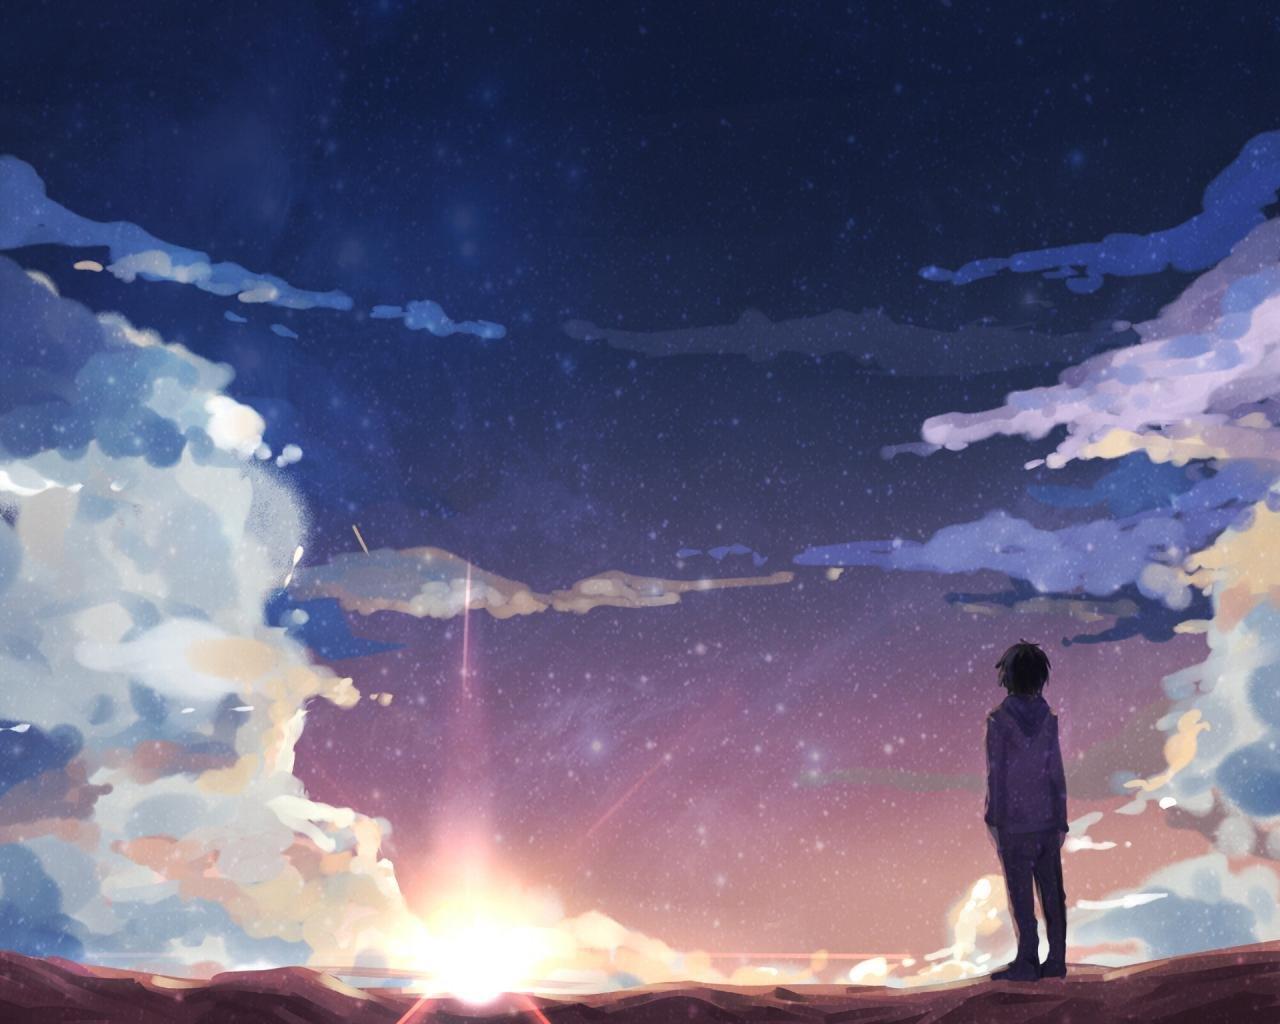 Your Name wallpapers 1280x1024 desktop backgrounds